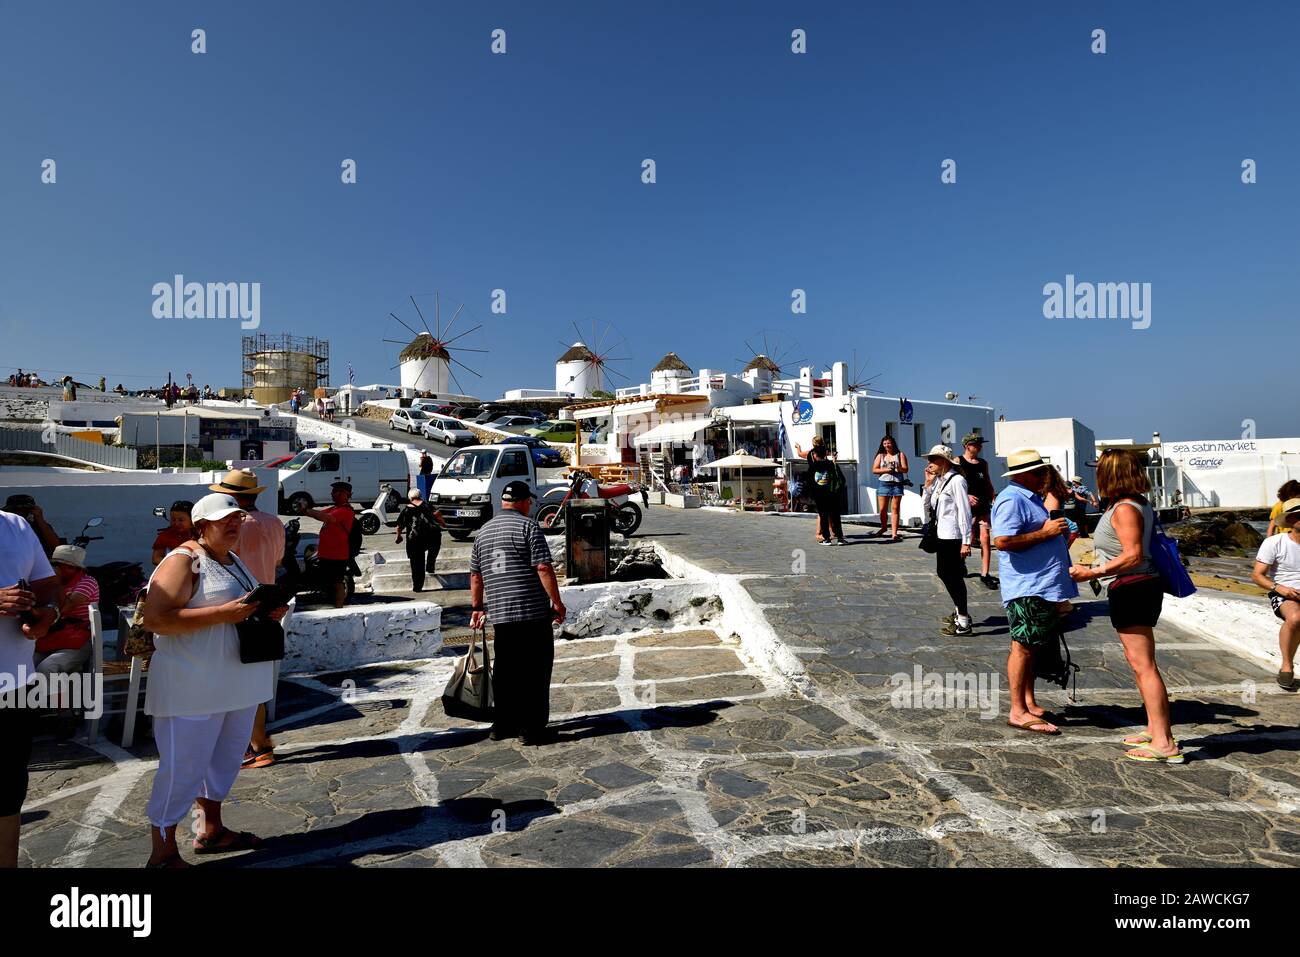 Mykonos Locals High Resolution Stock Photography and Images - Alamy